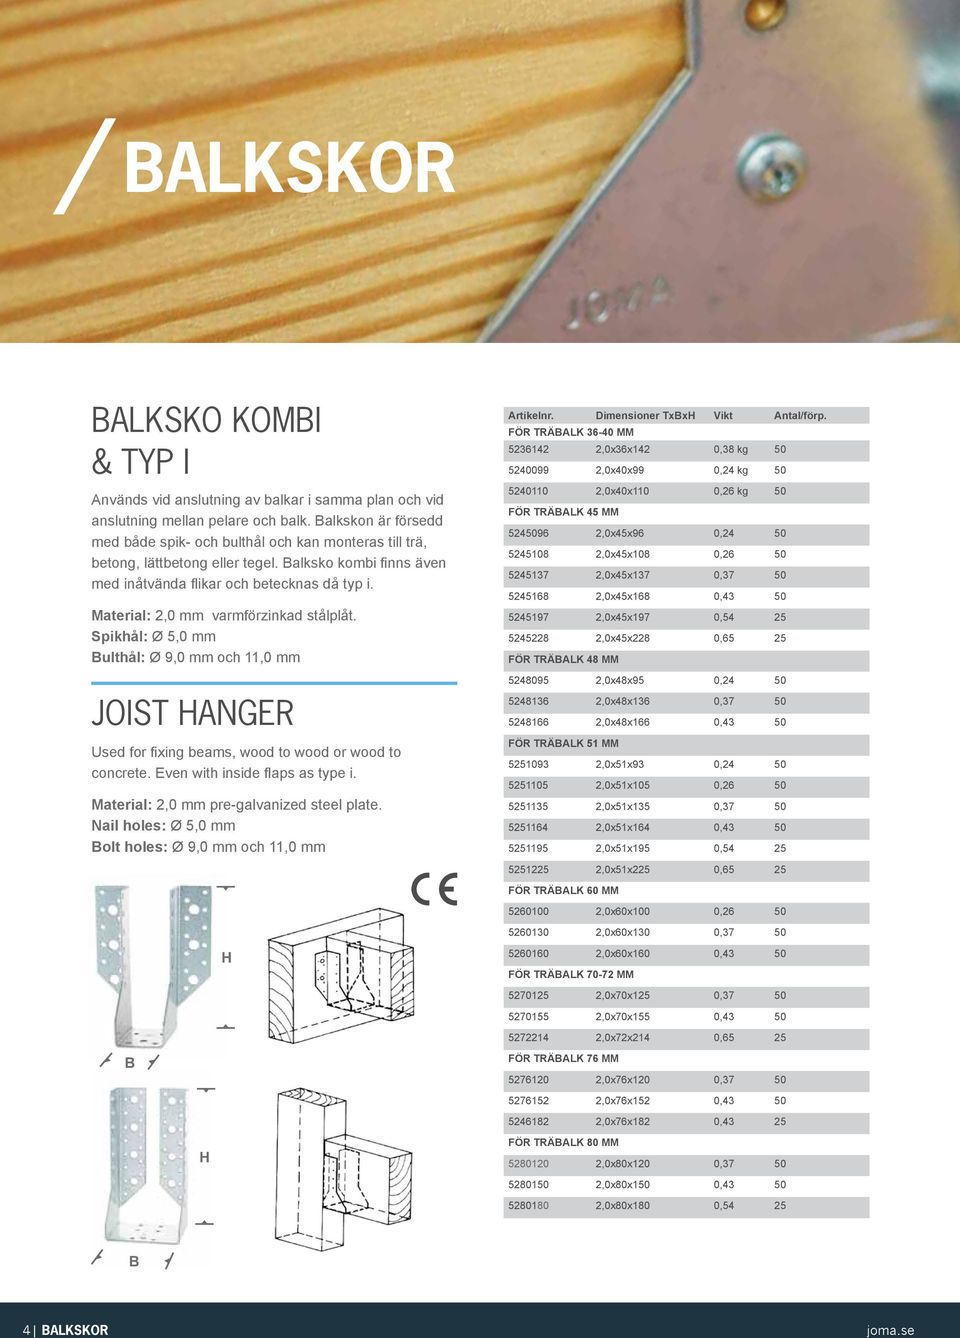 Material: 2,0 mm varmförzinkad stålplåt. ulthål: Ø 9,0 mm och 11,0 mm JOIST ANGER Used for fixing beams, wood to wood or wood to concrete. Even with inside flaps as type i.